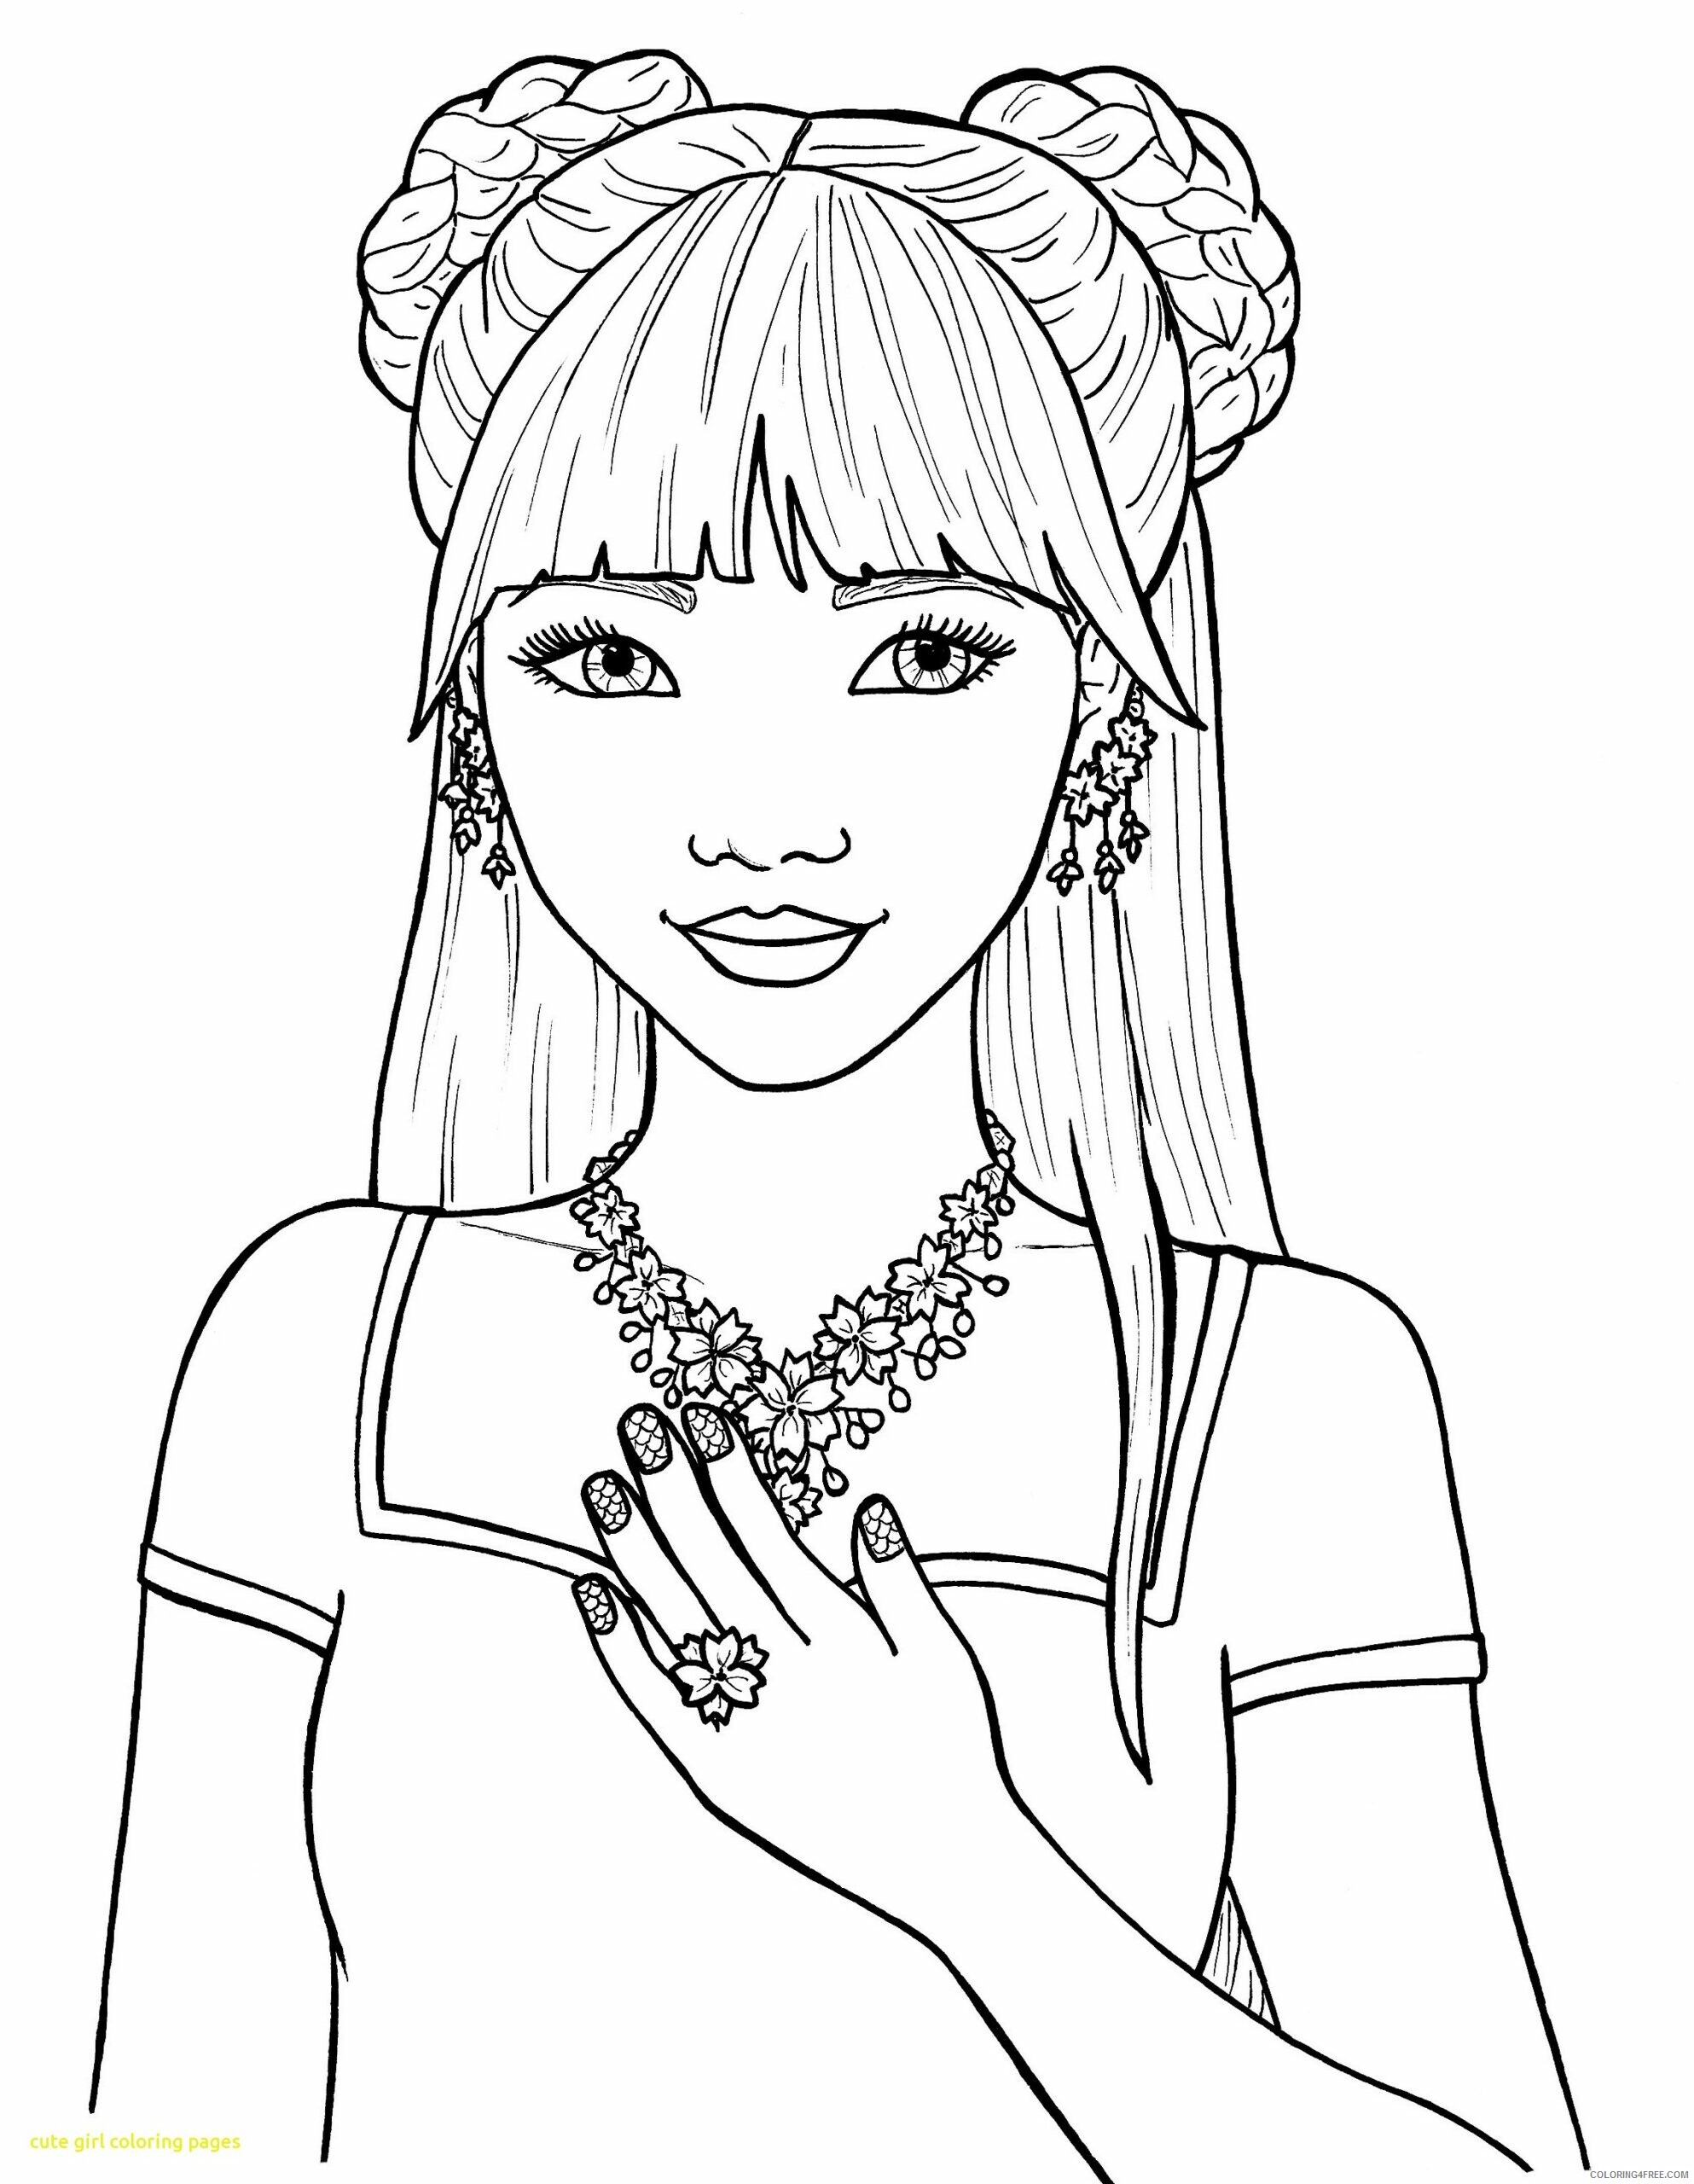 Girl Coloring Pages for Girls for Girls Free Printable 2021 0536 Coloring4free